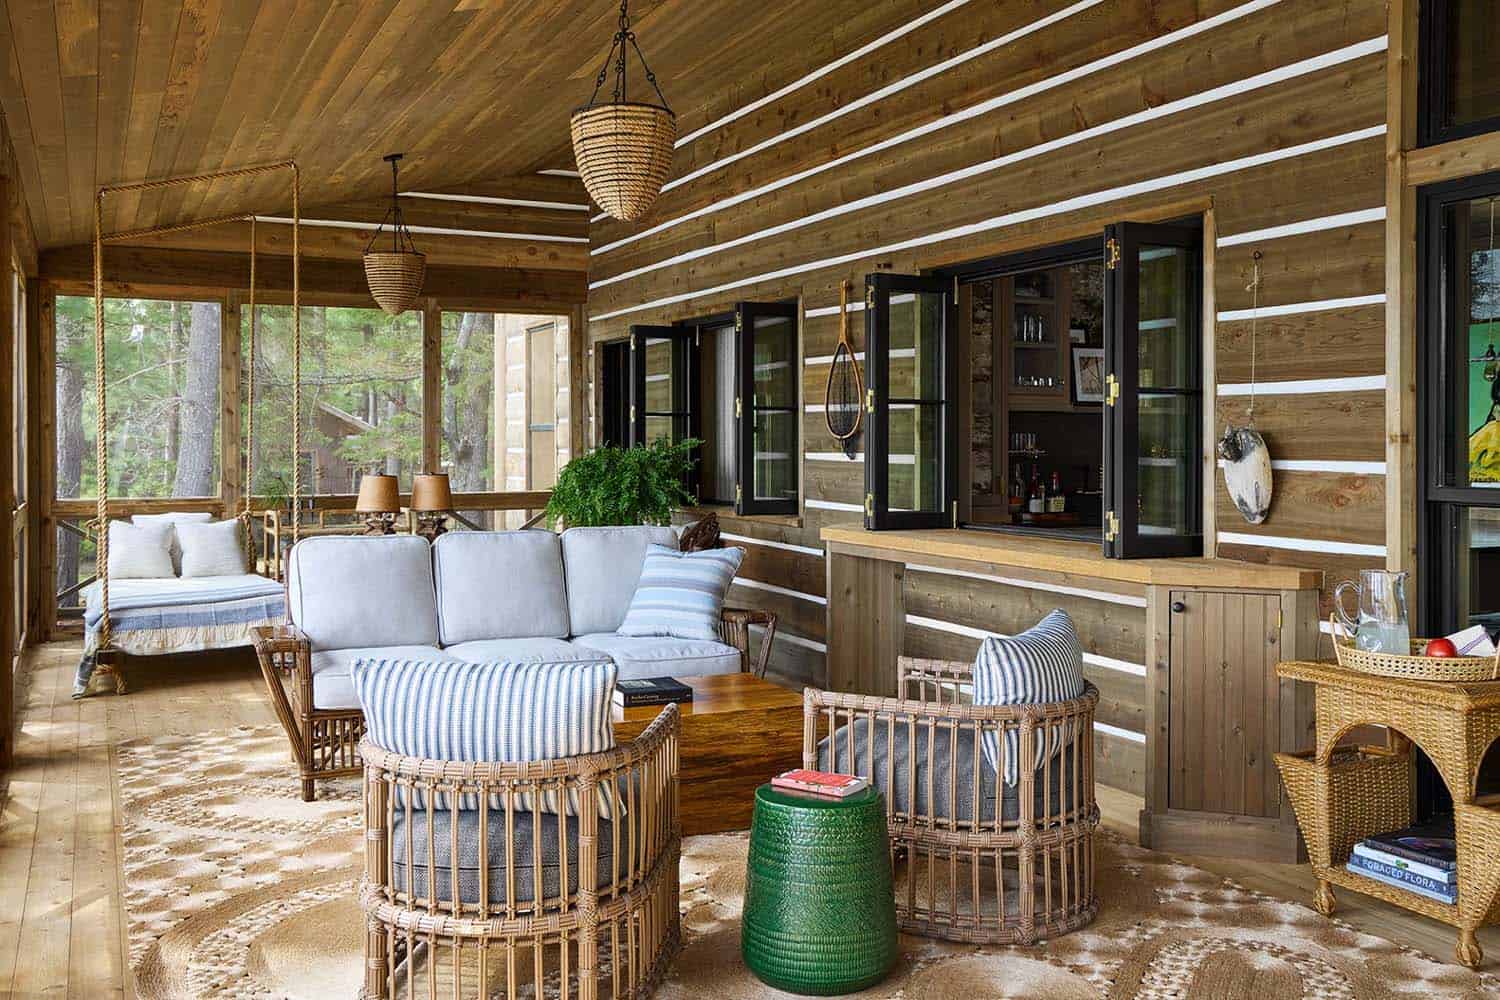 rustic screened porch with outdoor furniture and a pass-through window into the kitchen